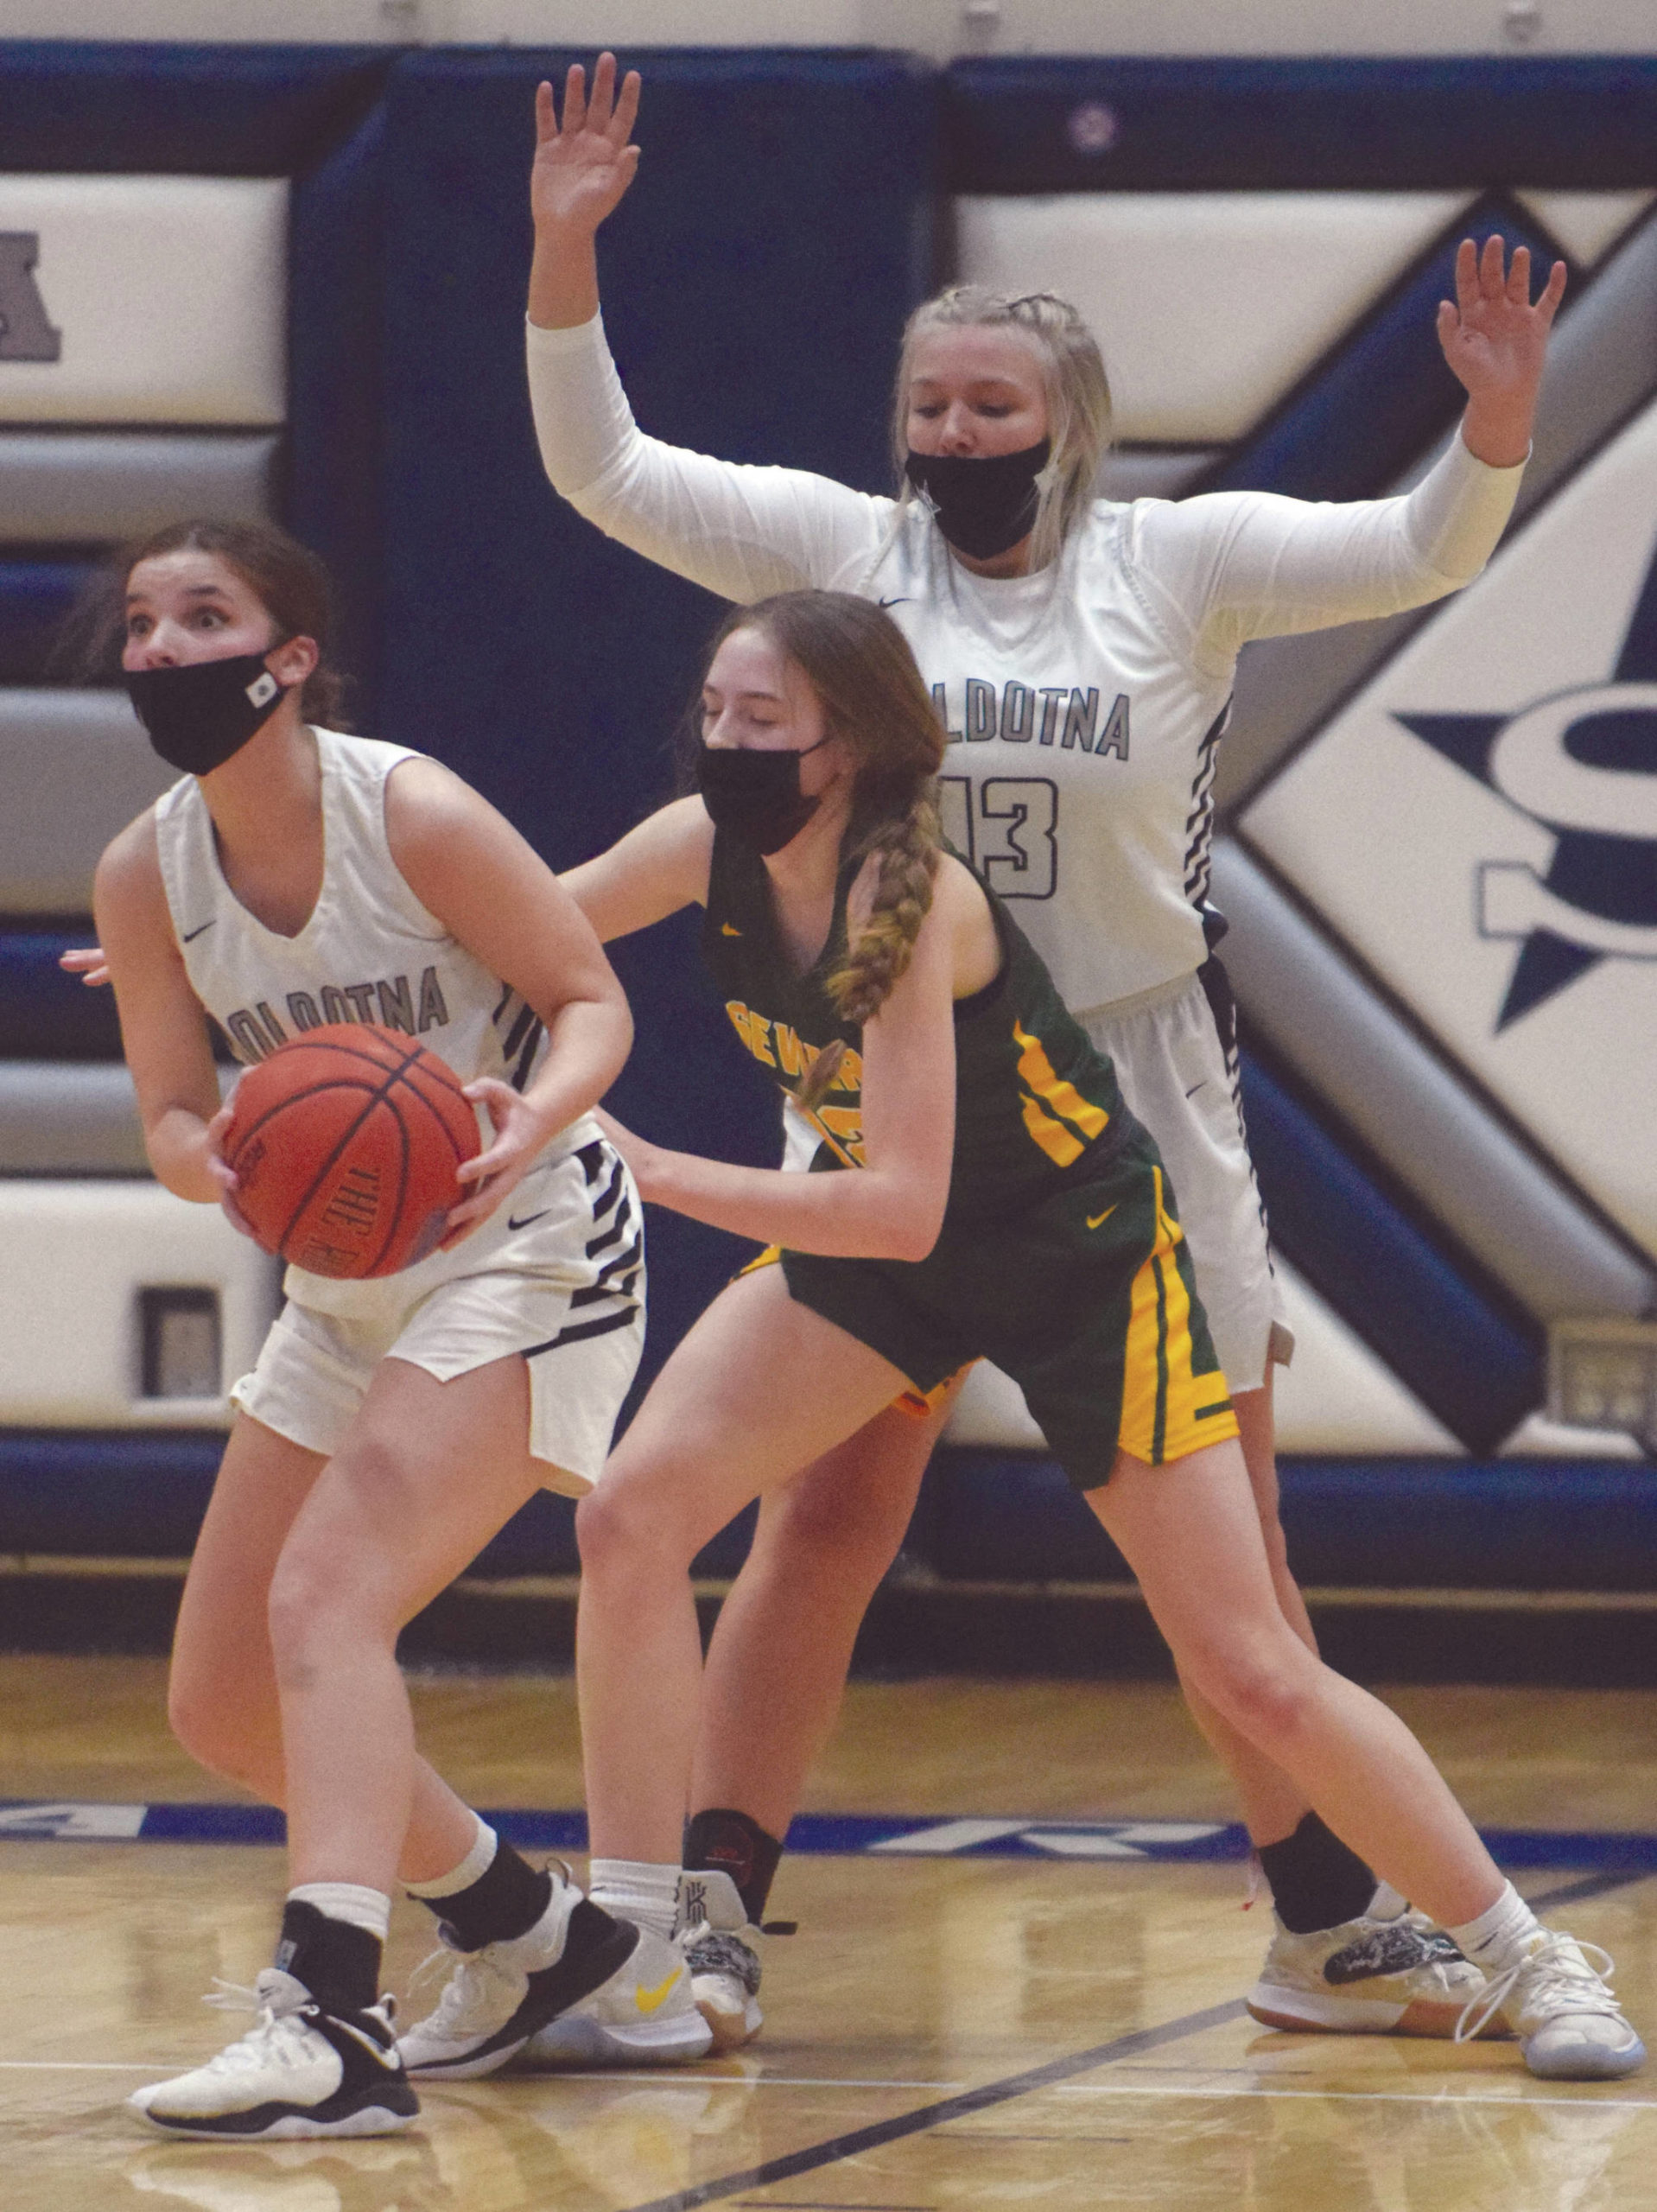 Soldotna’s Morgan Bouschor looks for an outlet pass under pressure from Seward’s Shelby Sieminski as Soldotna’s Taylor Edwards looks on at Soldotna High School on Tuesday, Feb. 23, 2021, in Soldotna, Alaska. (Photo by Jeff Helminiak/Peninsula Clarion)